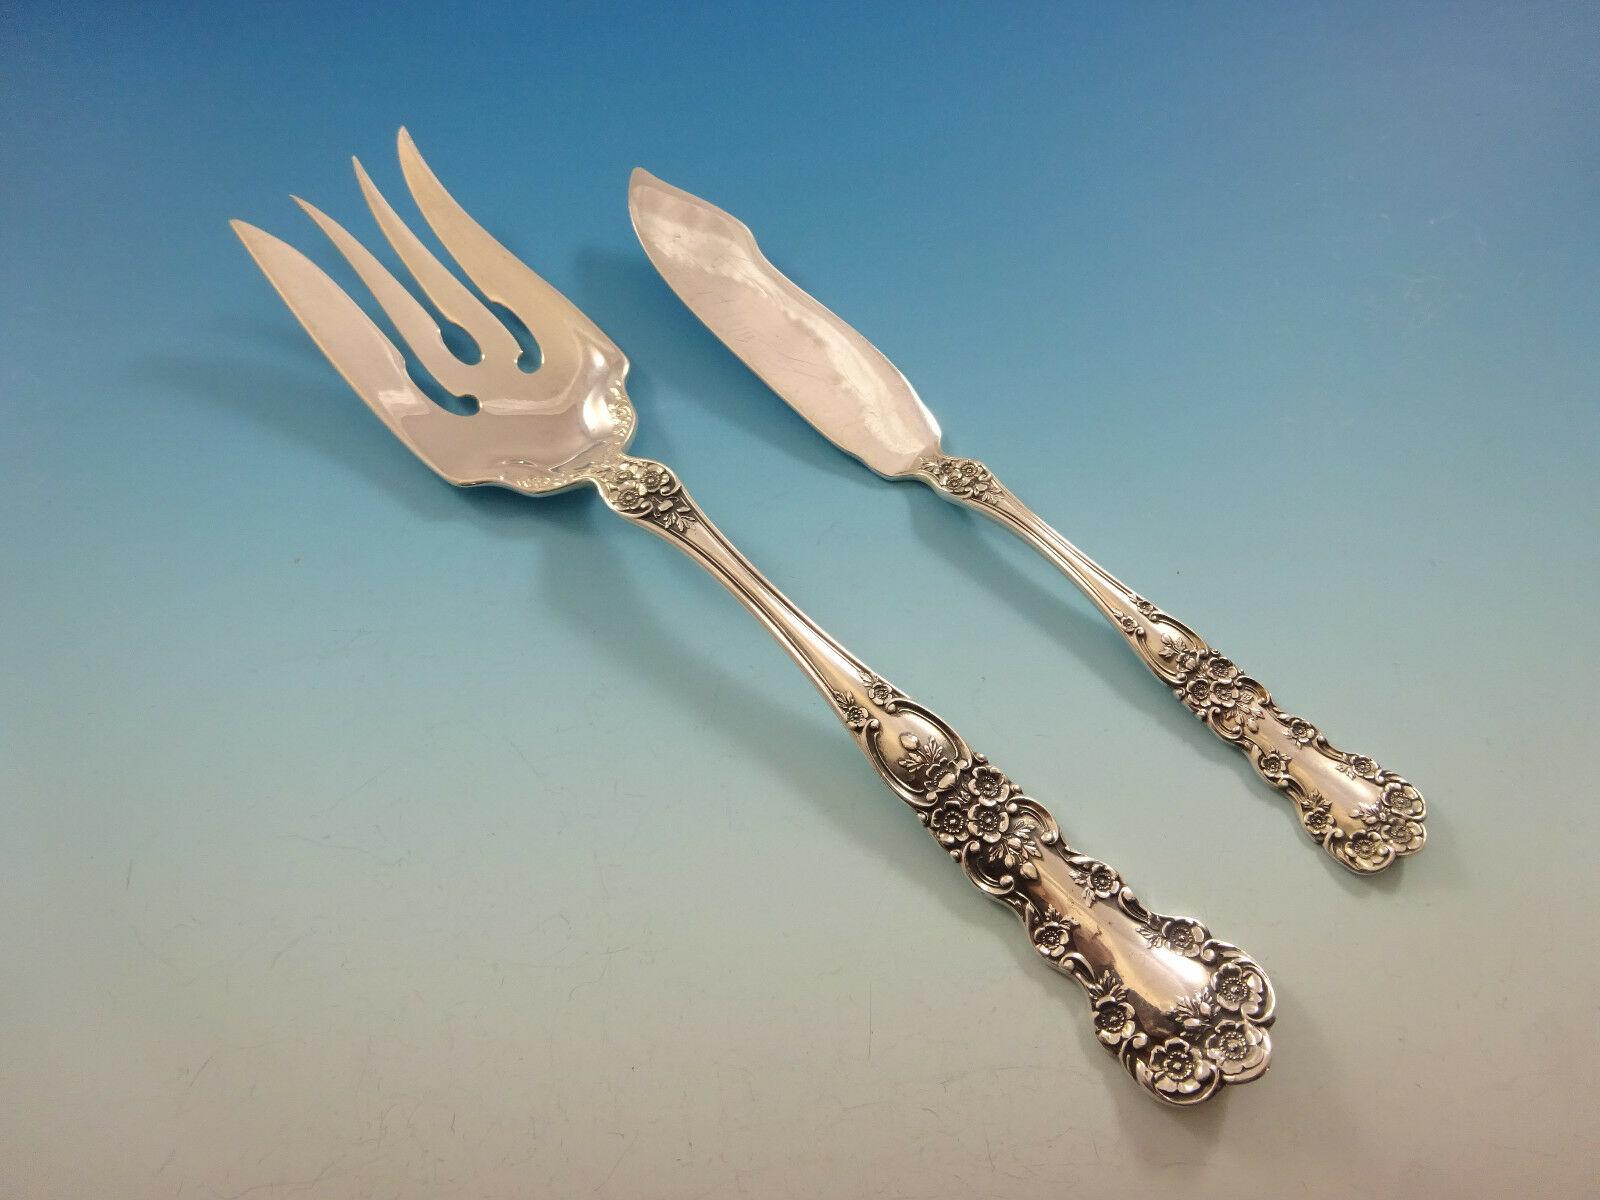 Buttercup by Gorham Sterling Silver Flatware Set 8 Service 72 Pieces Dinner 5